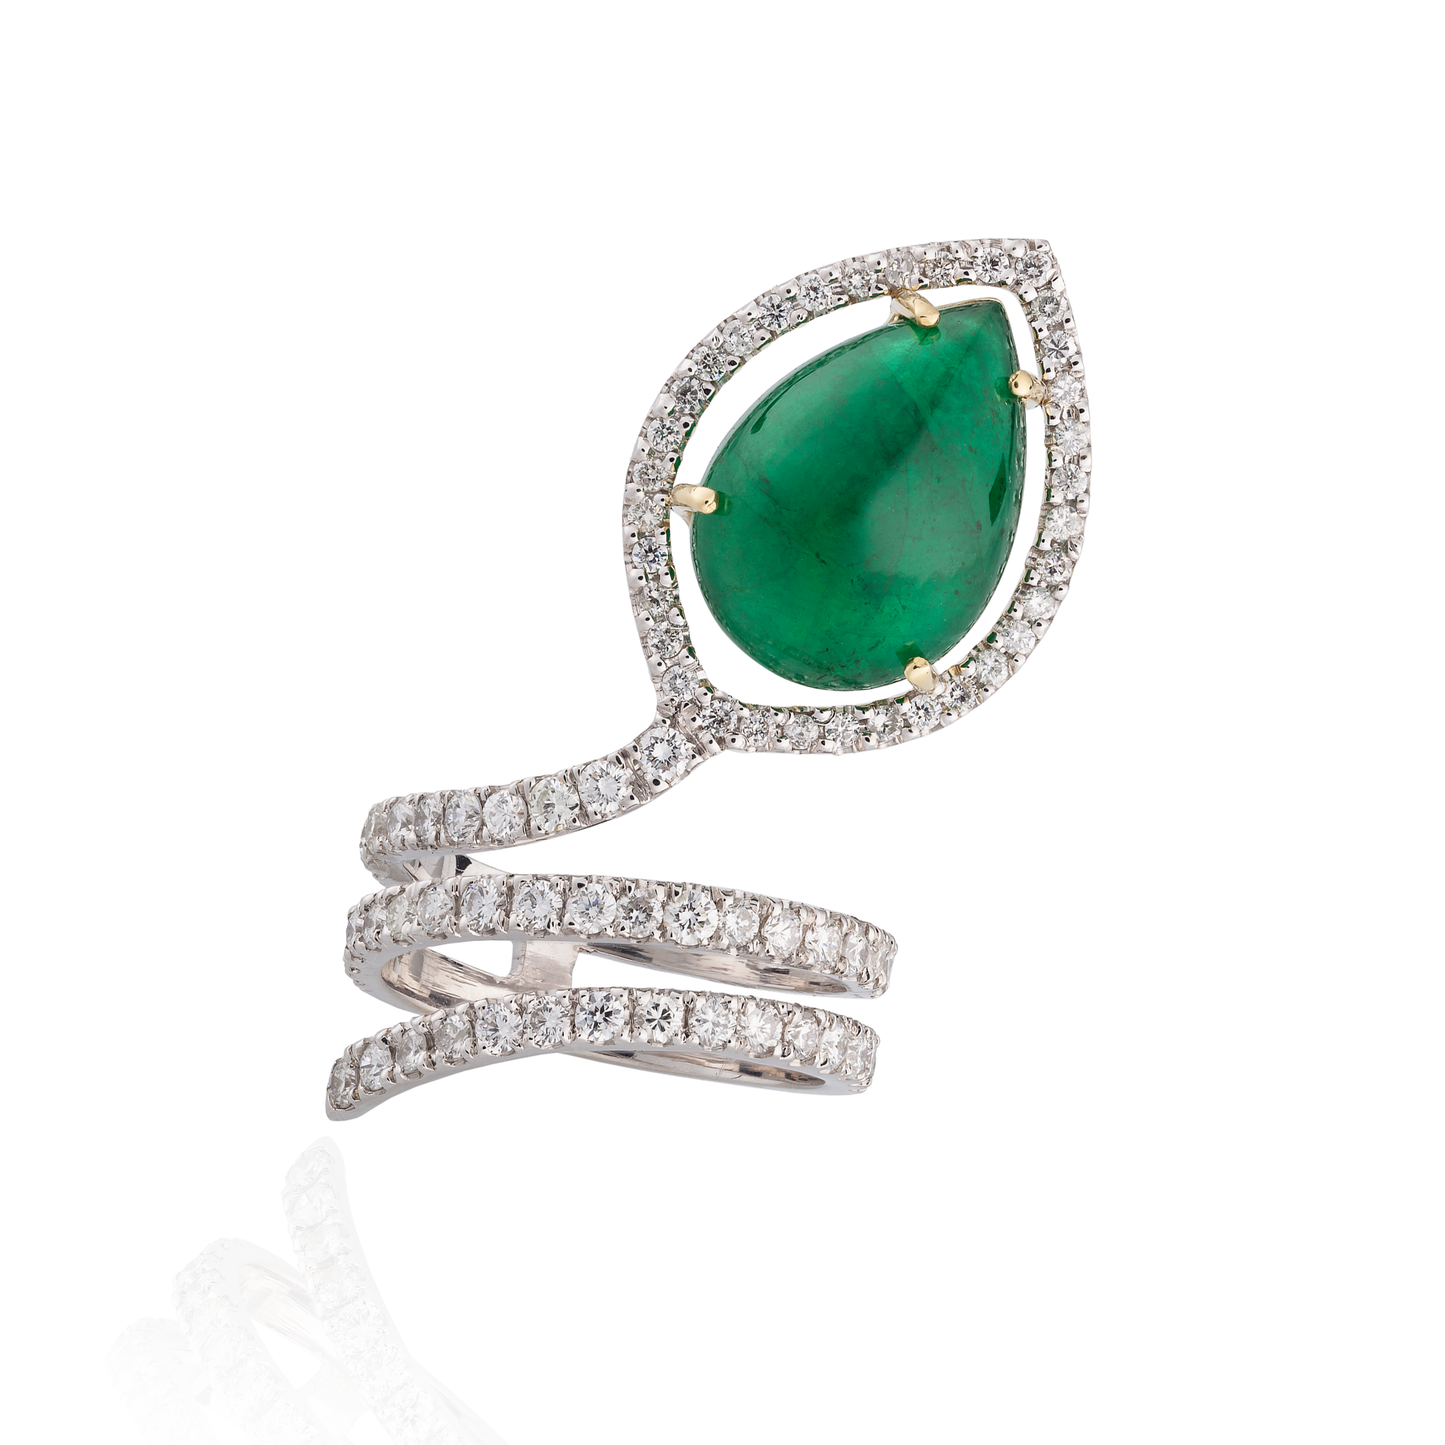 18K White Gold Snake Ring with Pear Shaped Emerald Cabochon